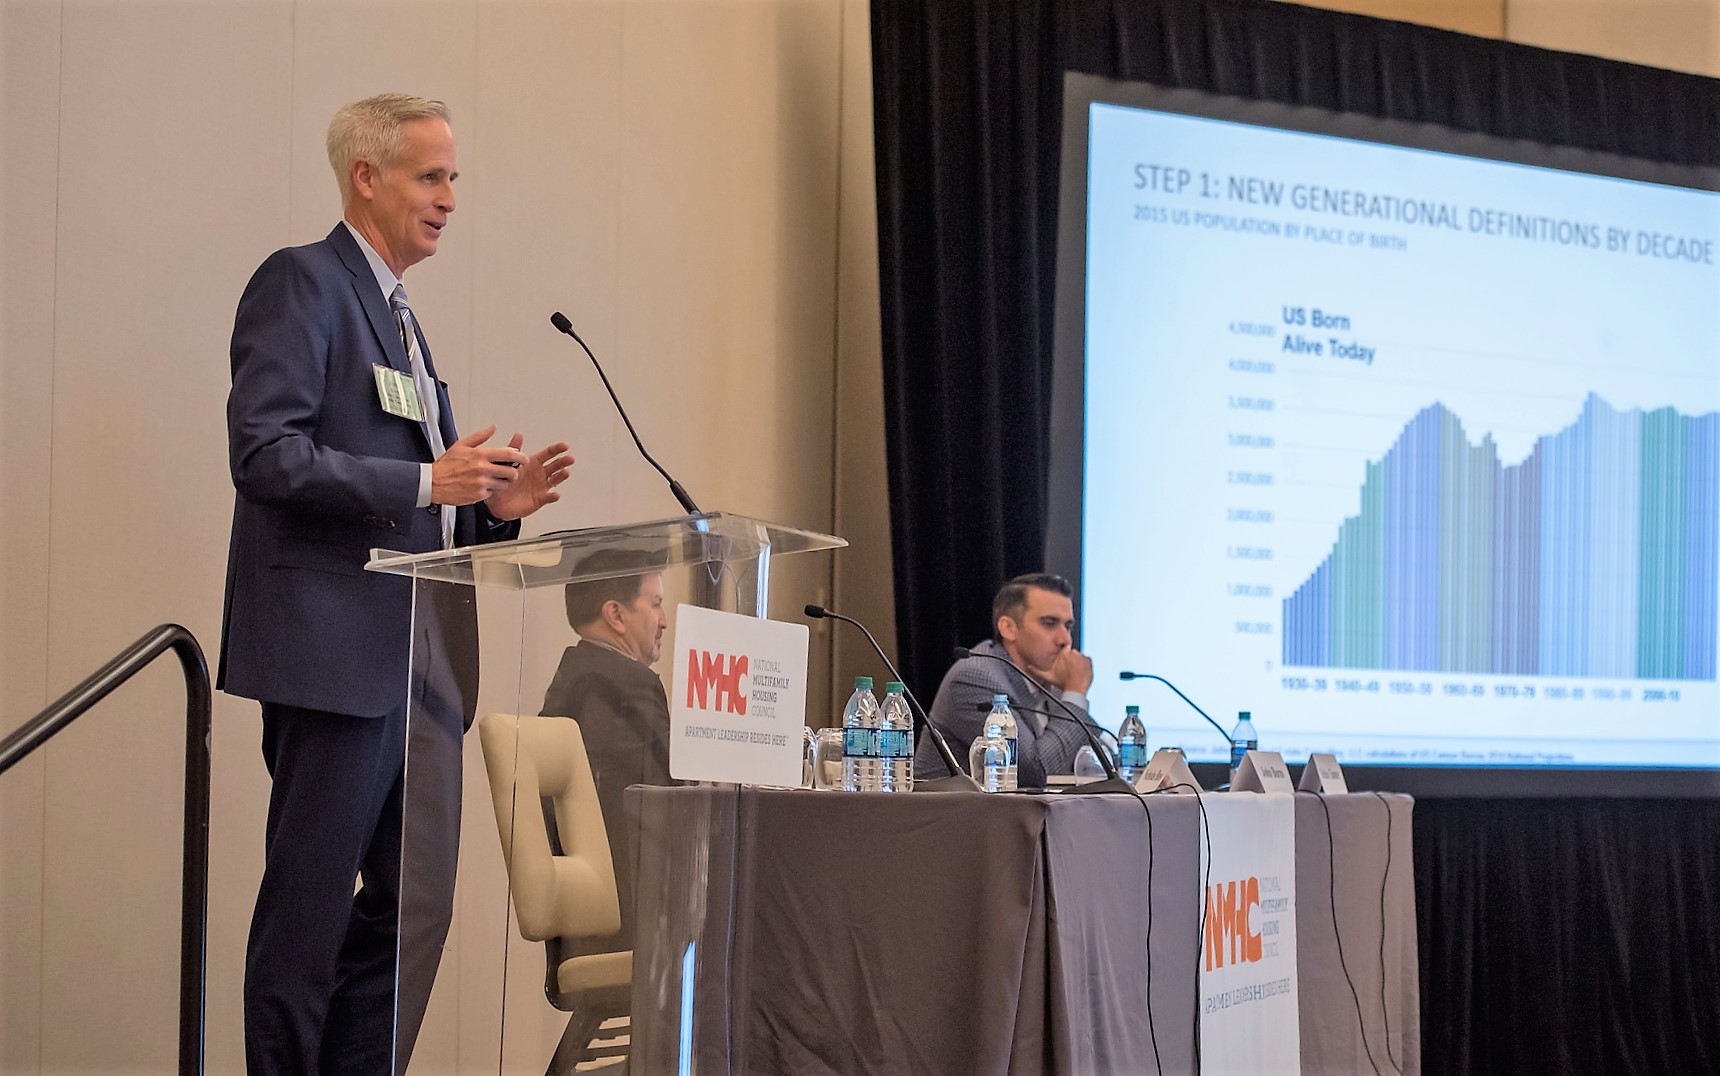 Housing Industry Should Shift Its Views on Millennials, NMHC Panelist Says